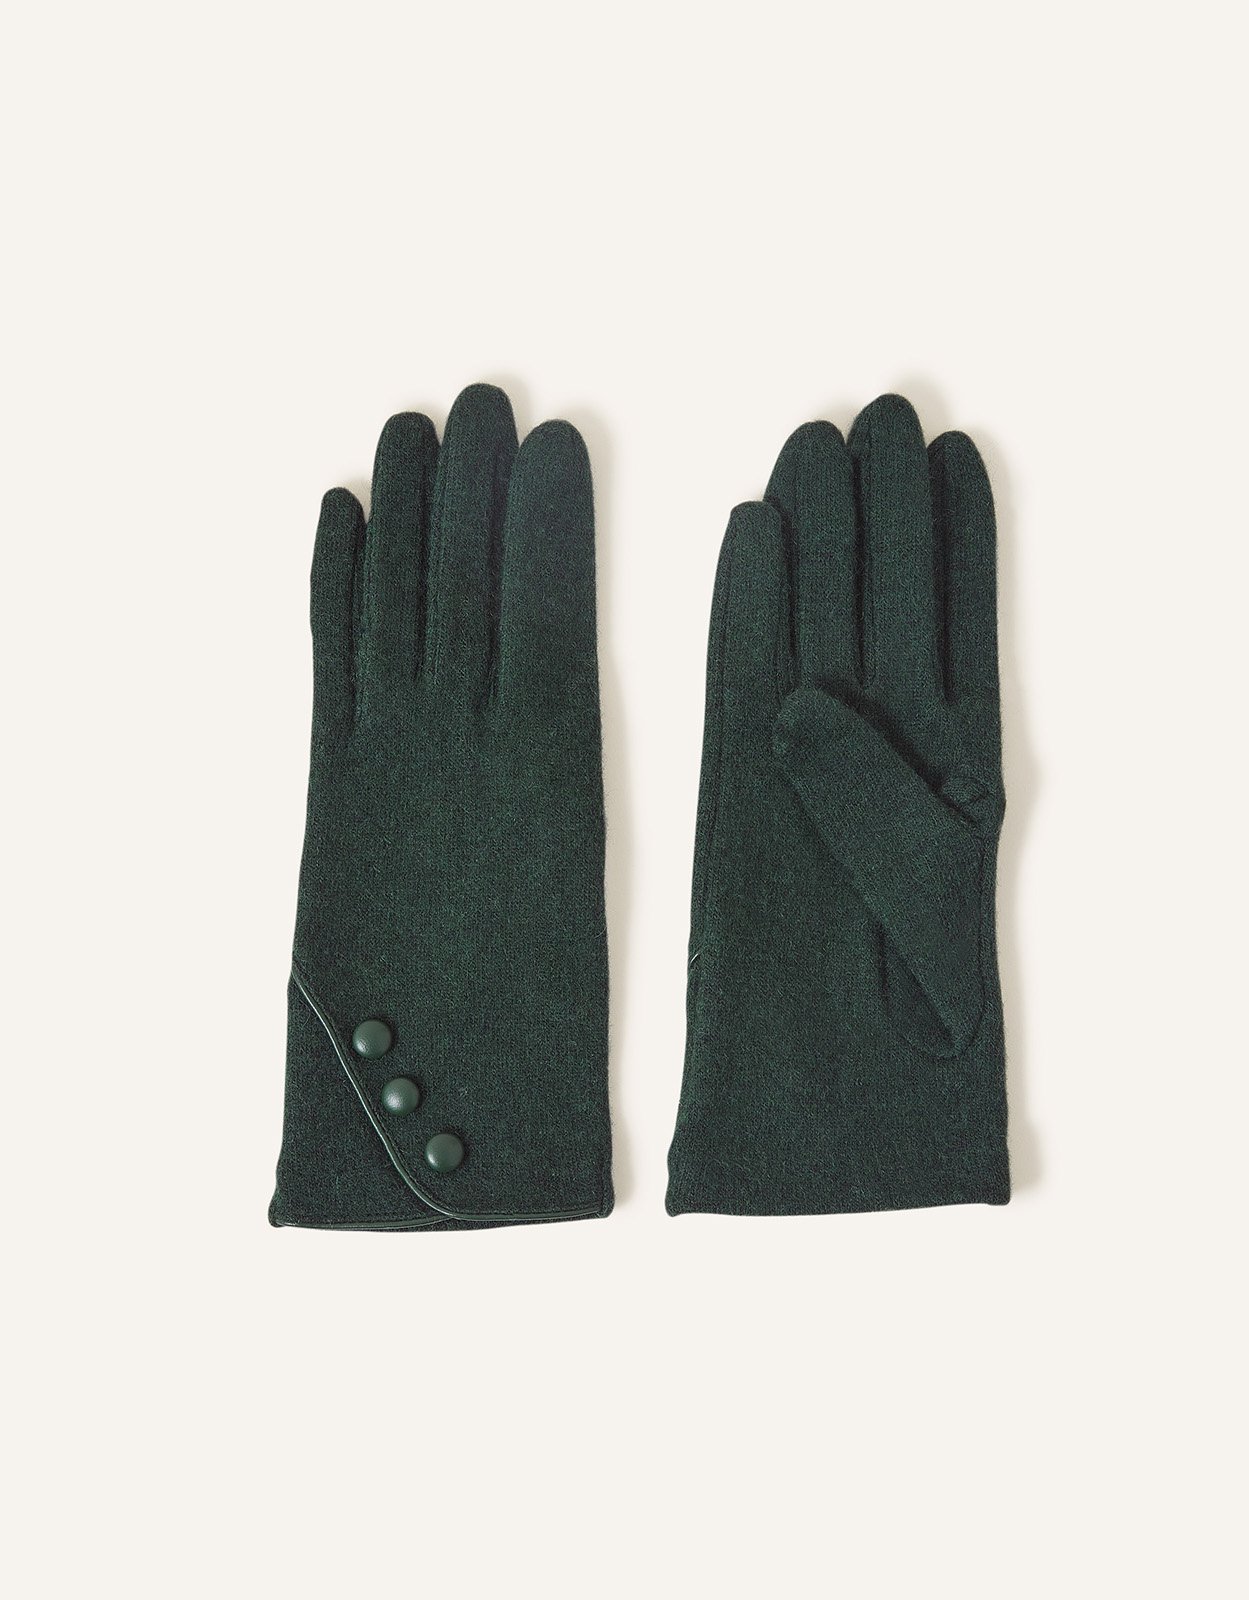 Accessorize Touchscreen Button Gloves in Wool Blend Green, Size: One Size